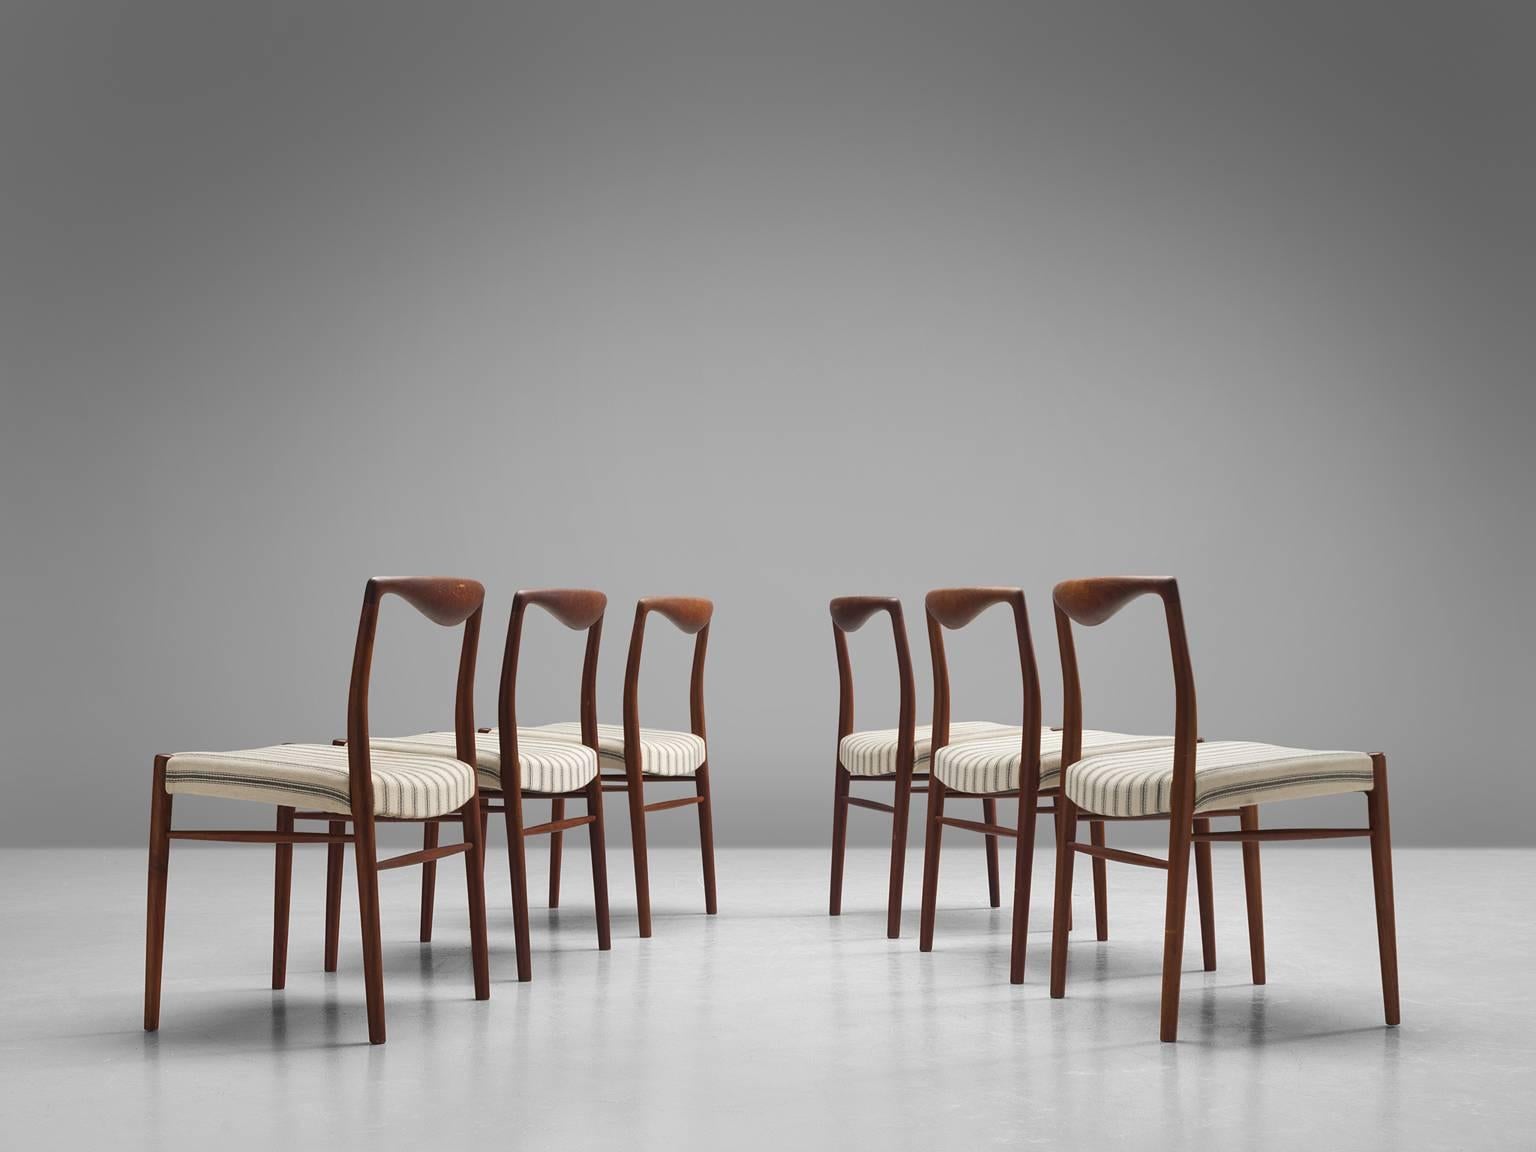 Kai Lyngfeldt Larsen for Soren Willadsen, set of six dining chairs in teak and white to beige fabric, Denmark, 1960s.

These elegant, curvy dining chairs show wonderful craftsmanship. The top rail is formed by a sculptural piece of soft teak that